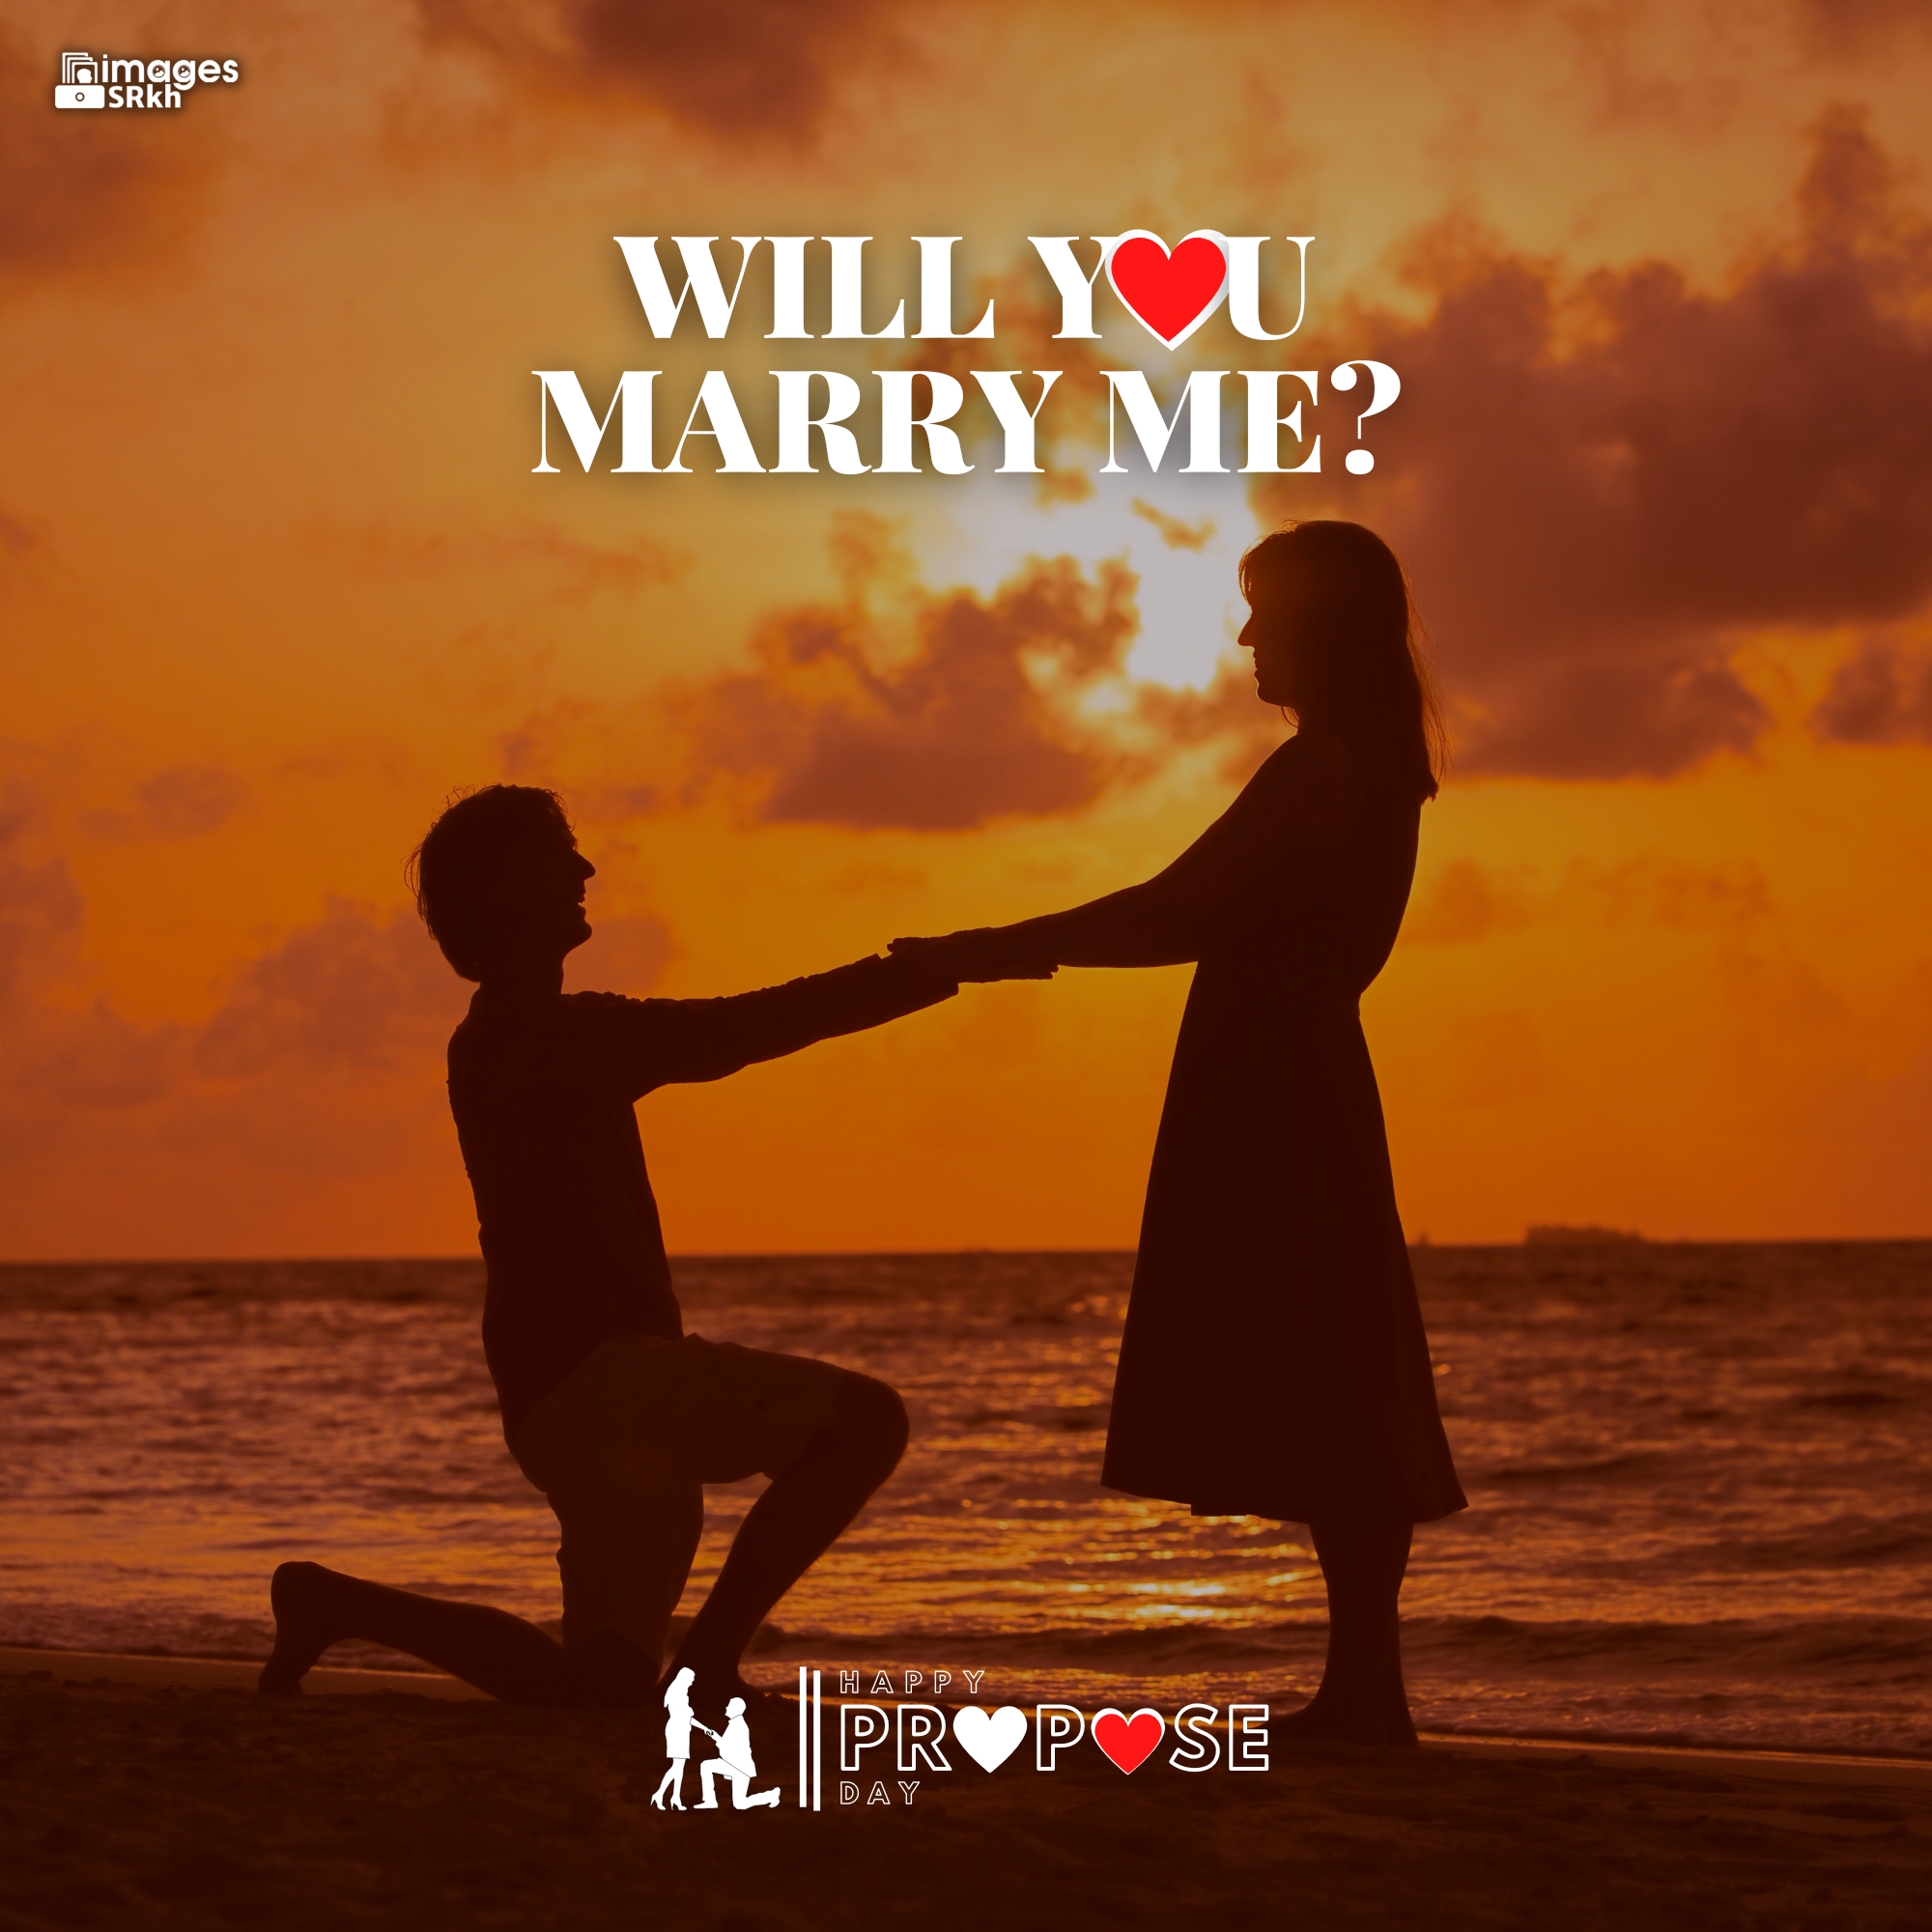 Propose Day Images | 278 | Will You MARRY ME